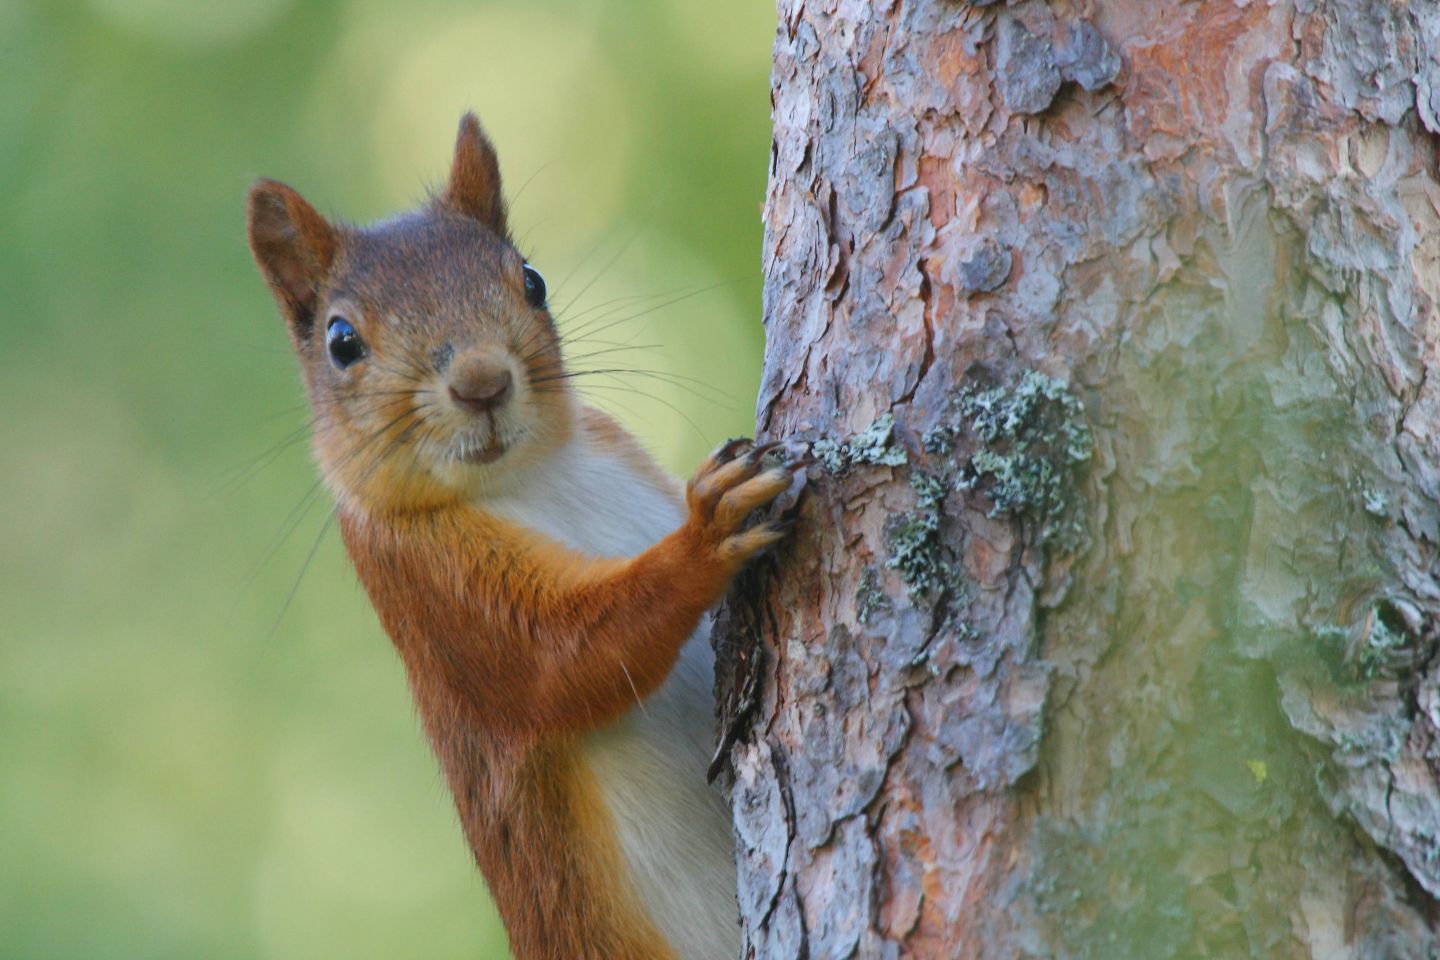 Squirrels, part of the Arctic wildlife you'll find in Finnish Lapland